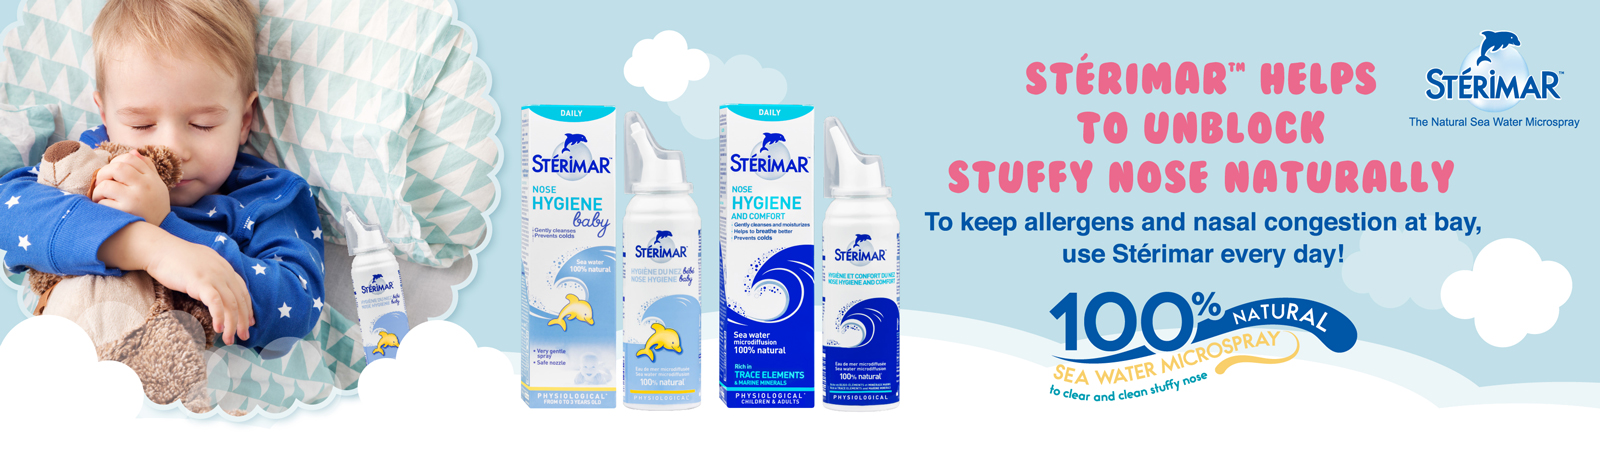 STERIMAR Nose Hygiene Baby: Loving care for little noses